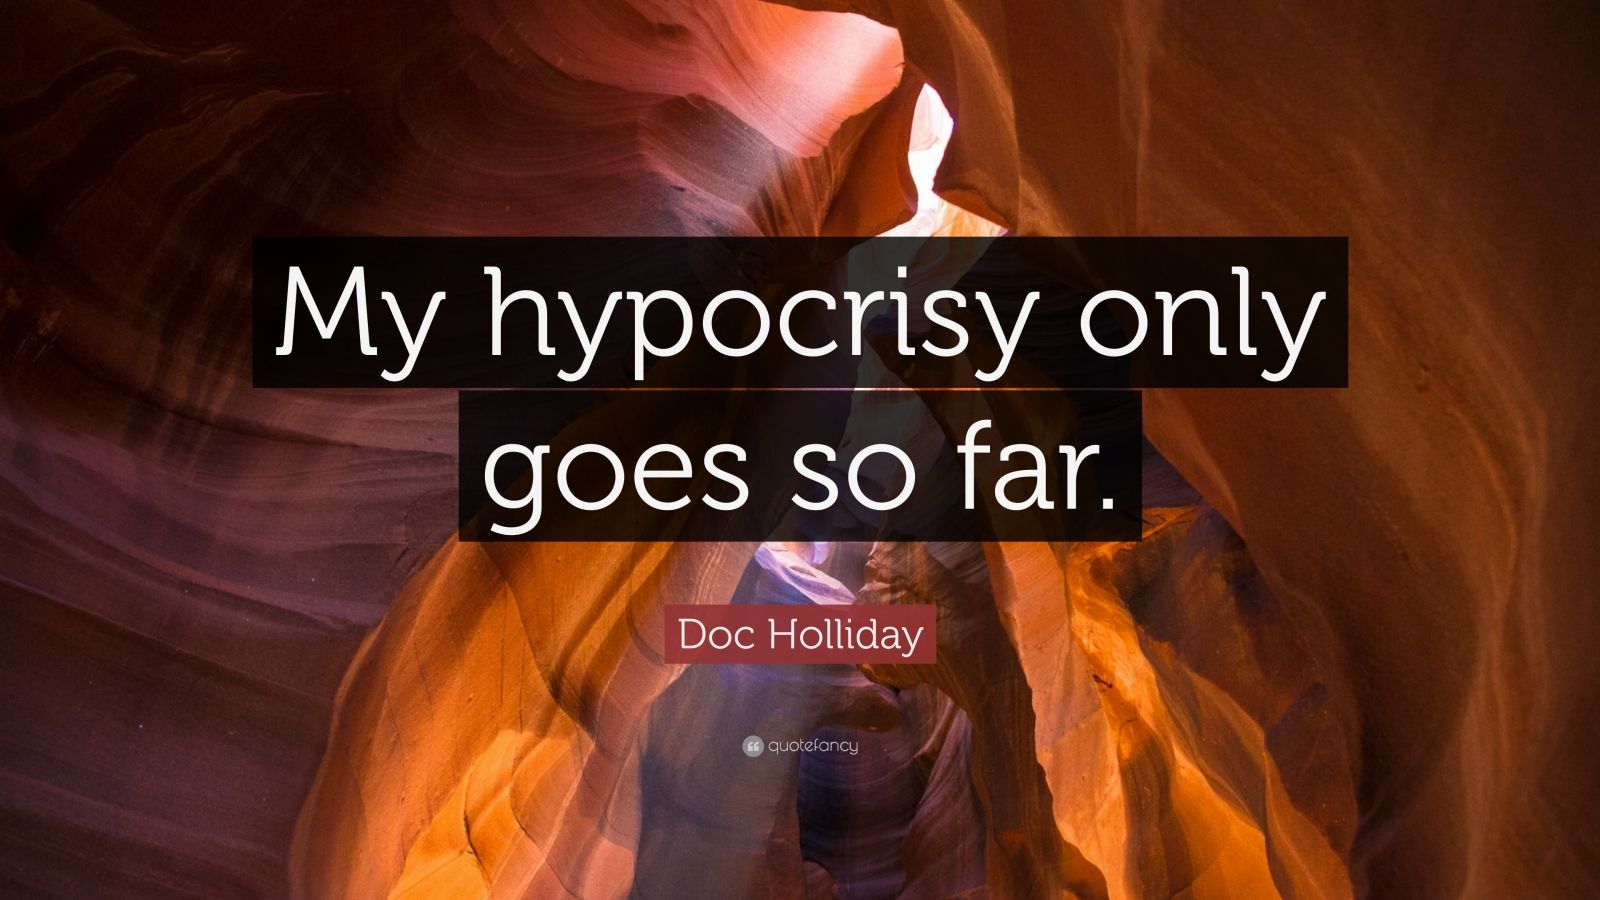 Doc Holliday Quote: "My hypocrisy only goes so far." (7 wallpapers) - Quotefancy